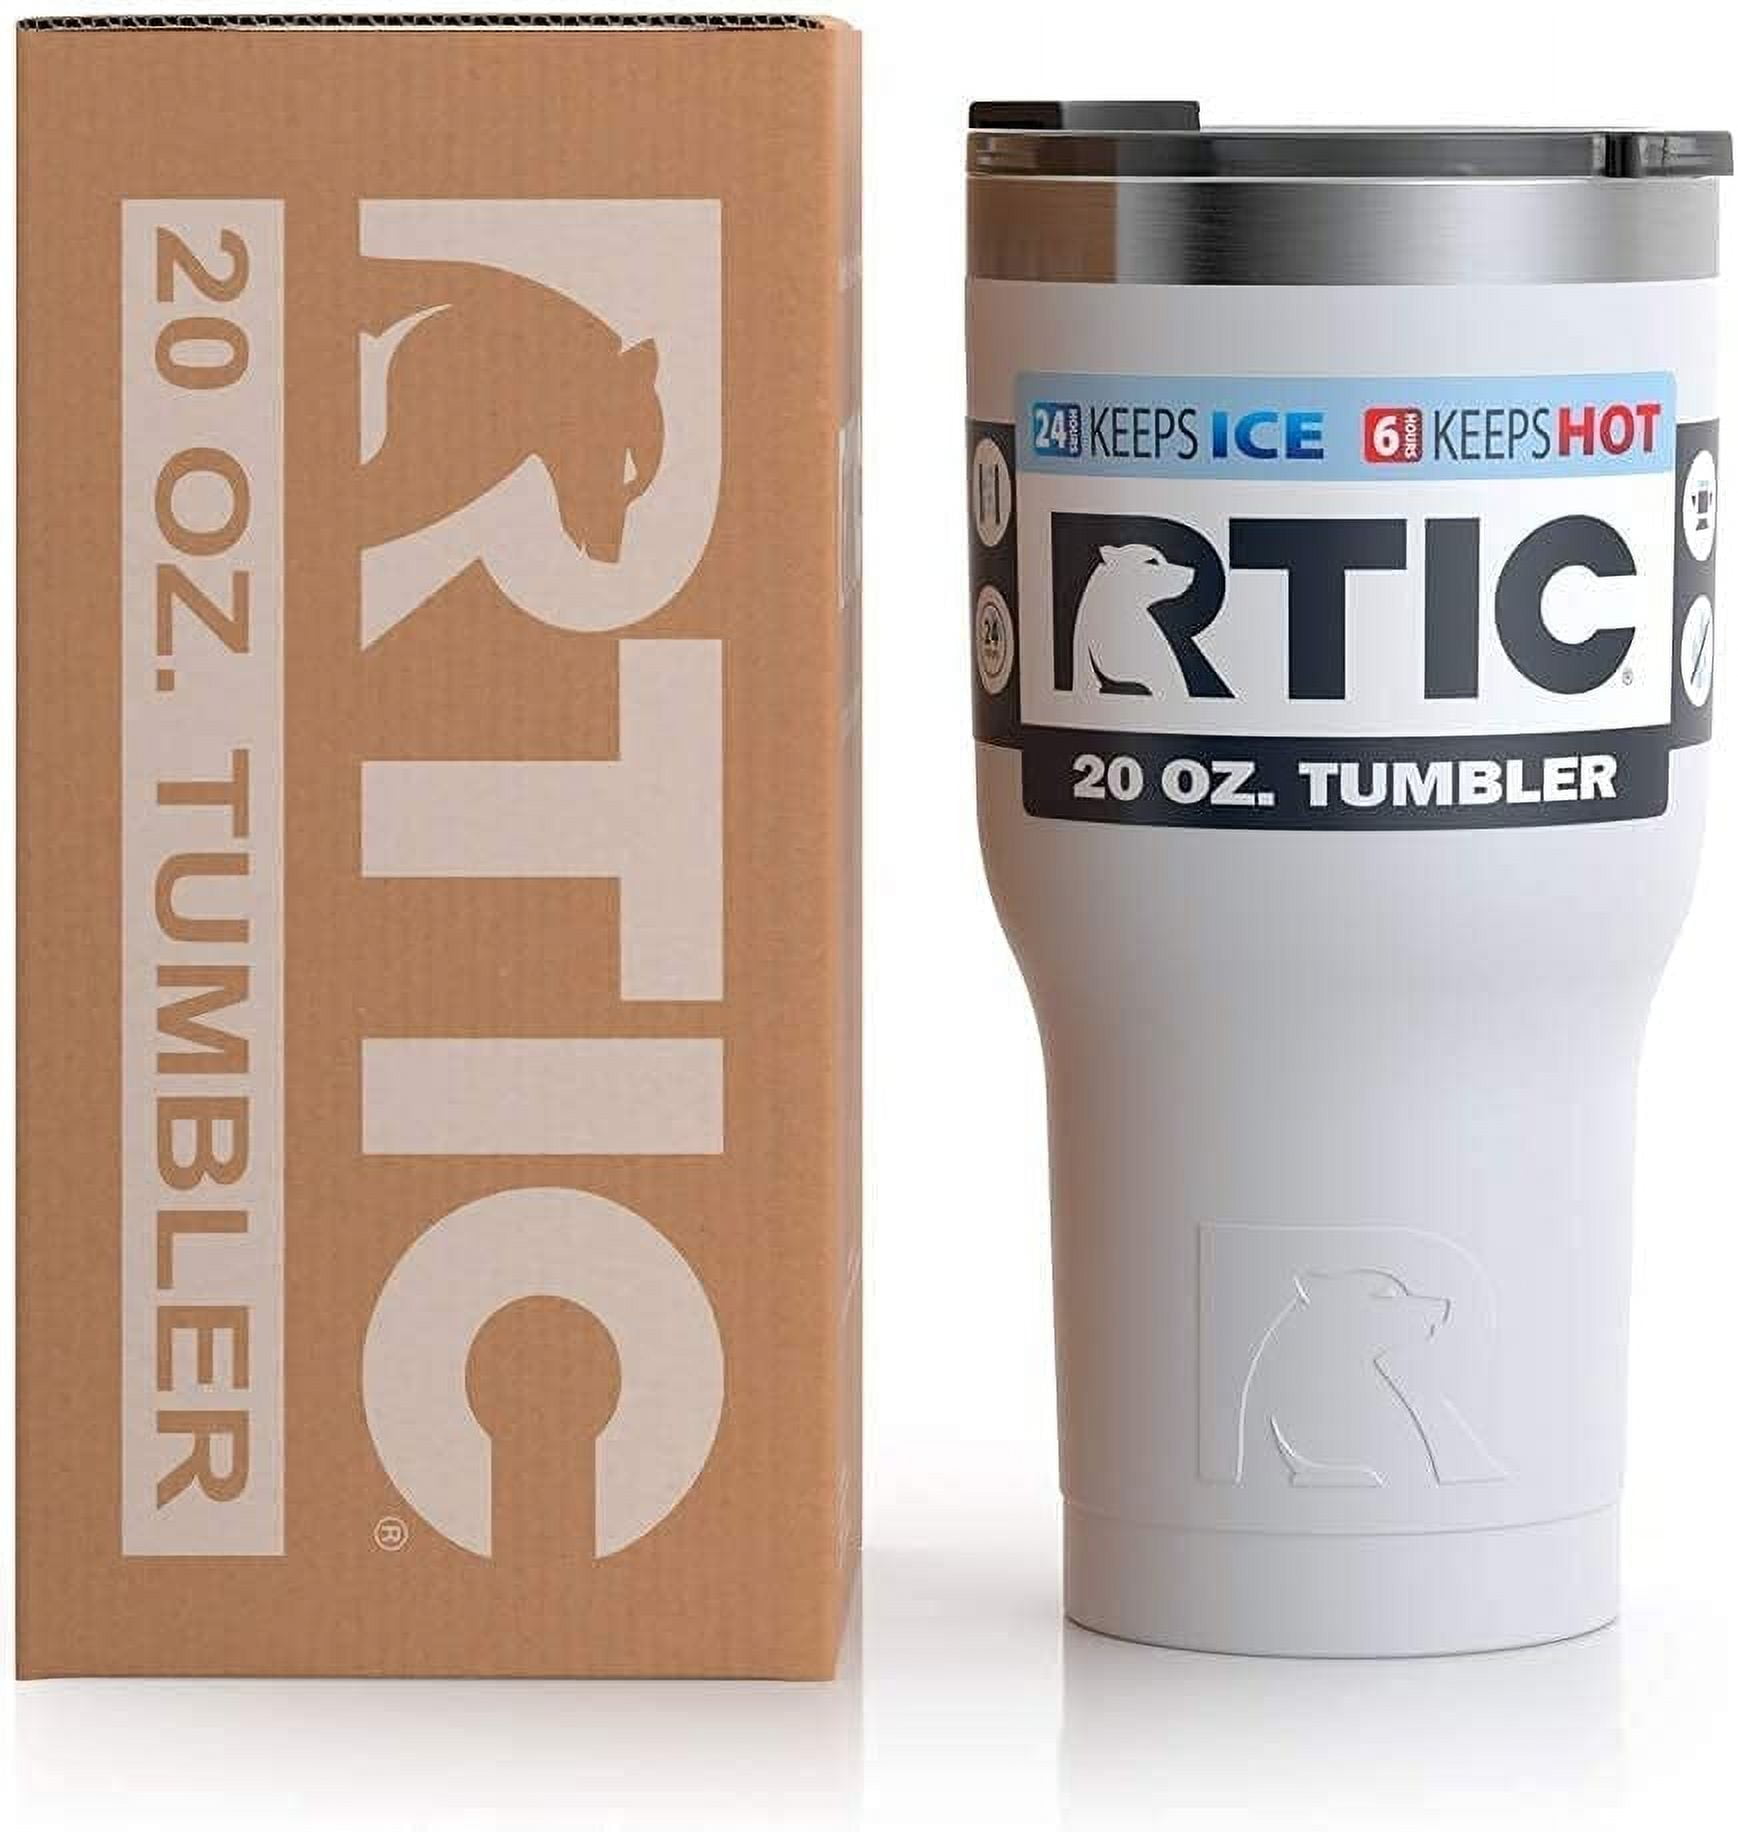 BRAND NEW RTIC Tumbler 20 oz - $12 each - general for sale - by owner -  craigslist